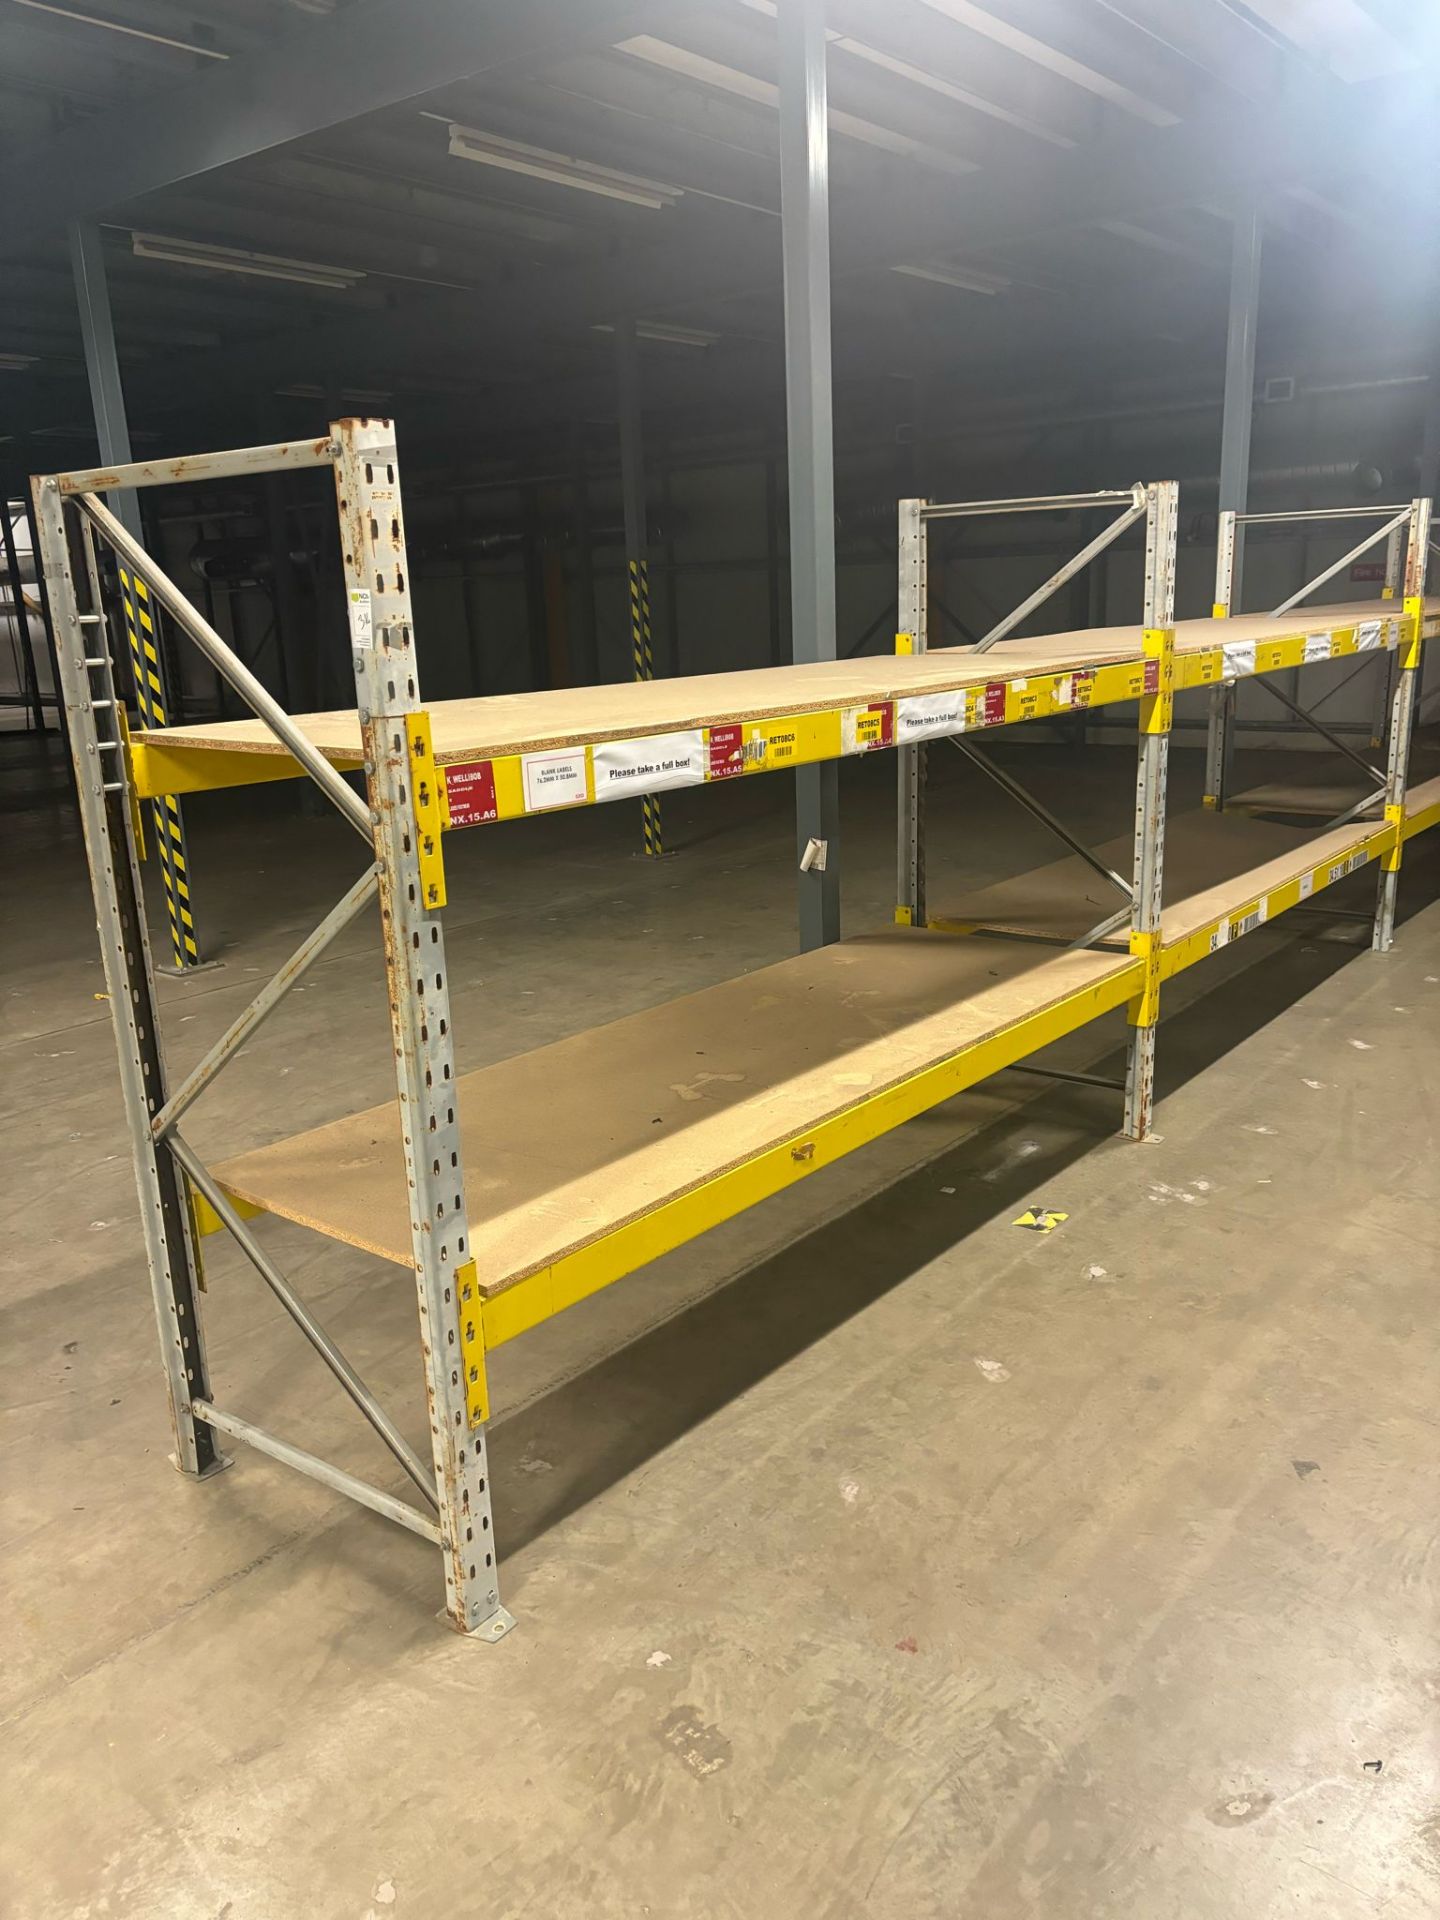 4 BAYS OF BOLTLESS METAL STEEL WAREHOUSE RACKING SHELVING UNITS - EACH BAY 285 x 90 CM - Image 2 of 3